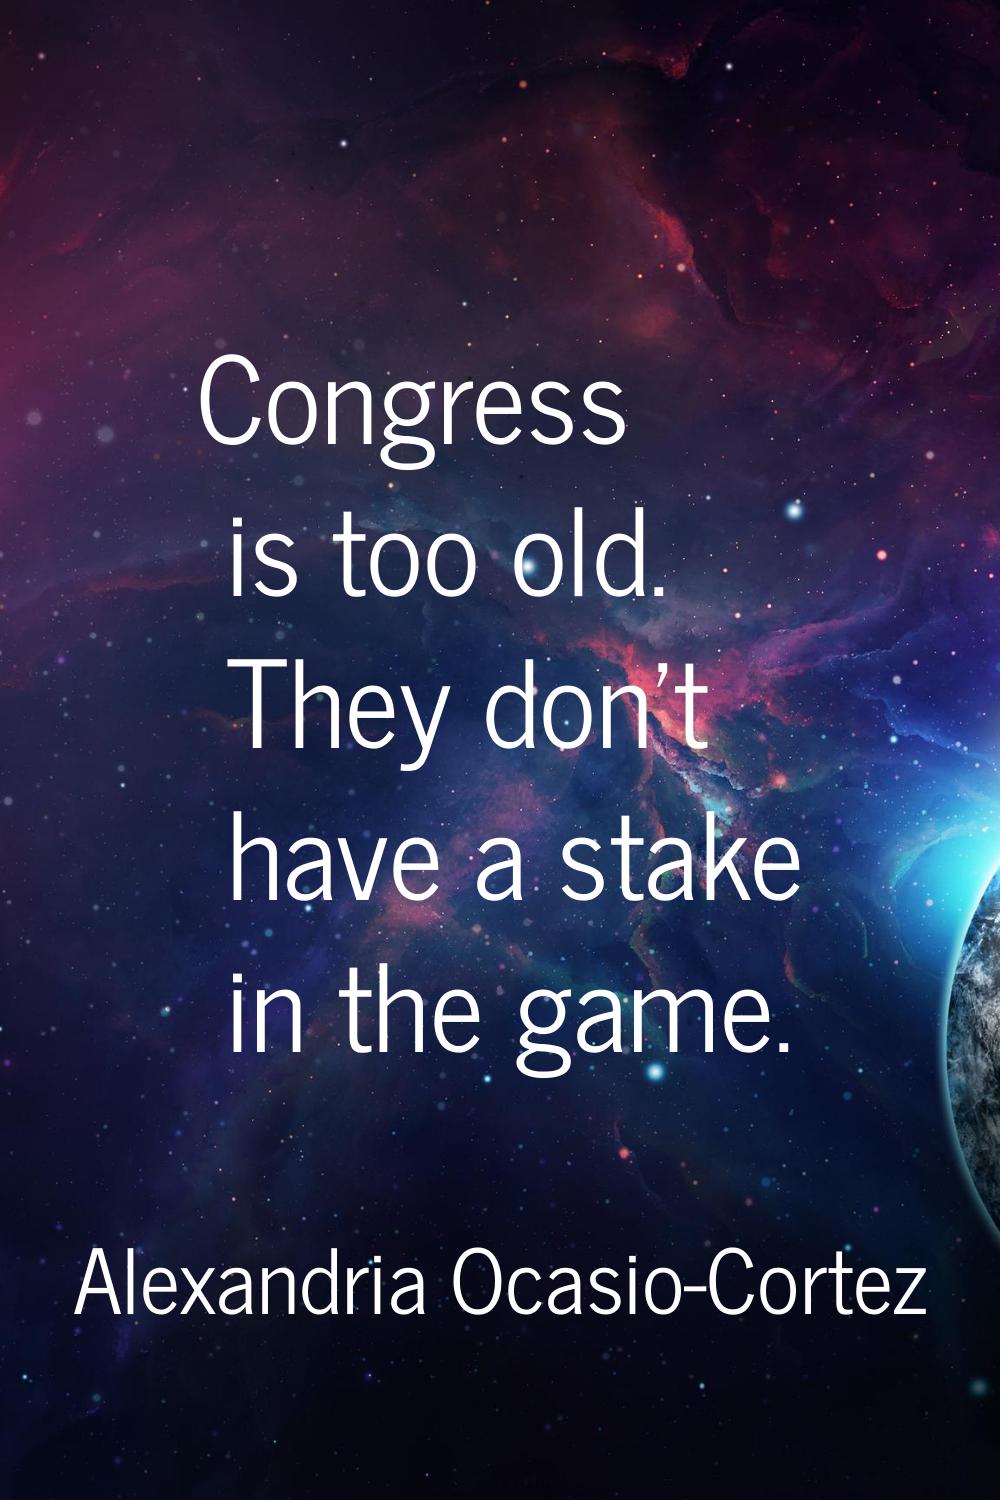 Congress is too old. They don't have a stake in the game.